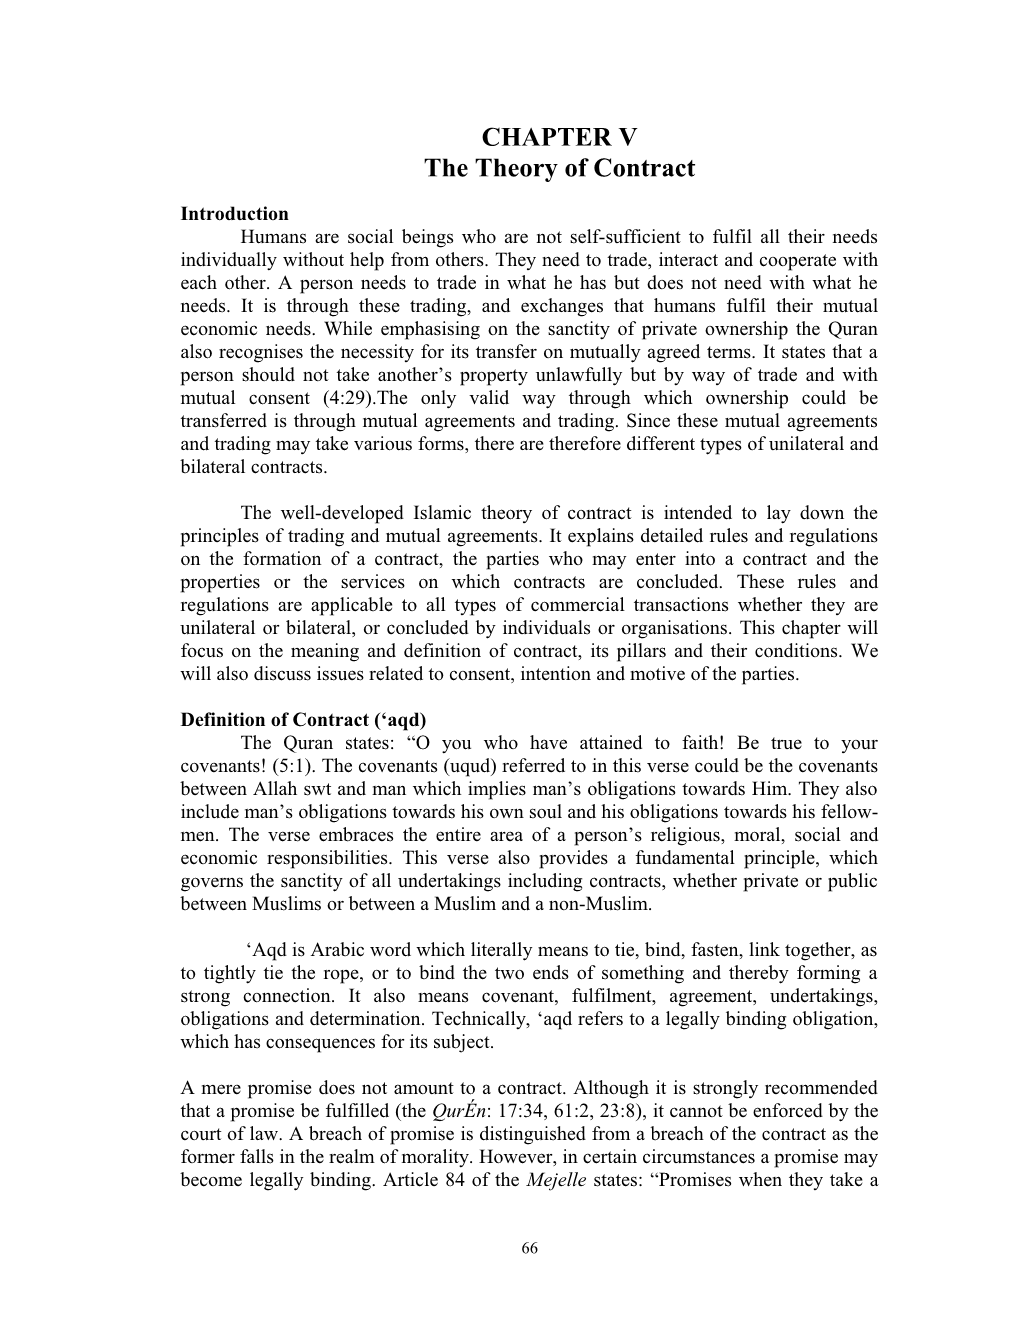 The Theory of Contract